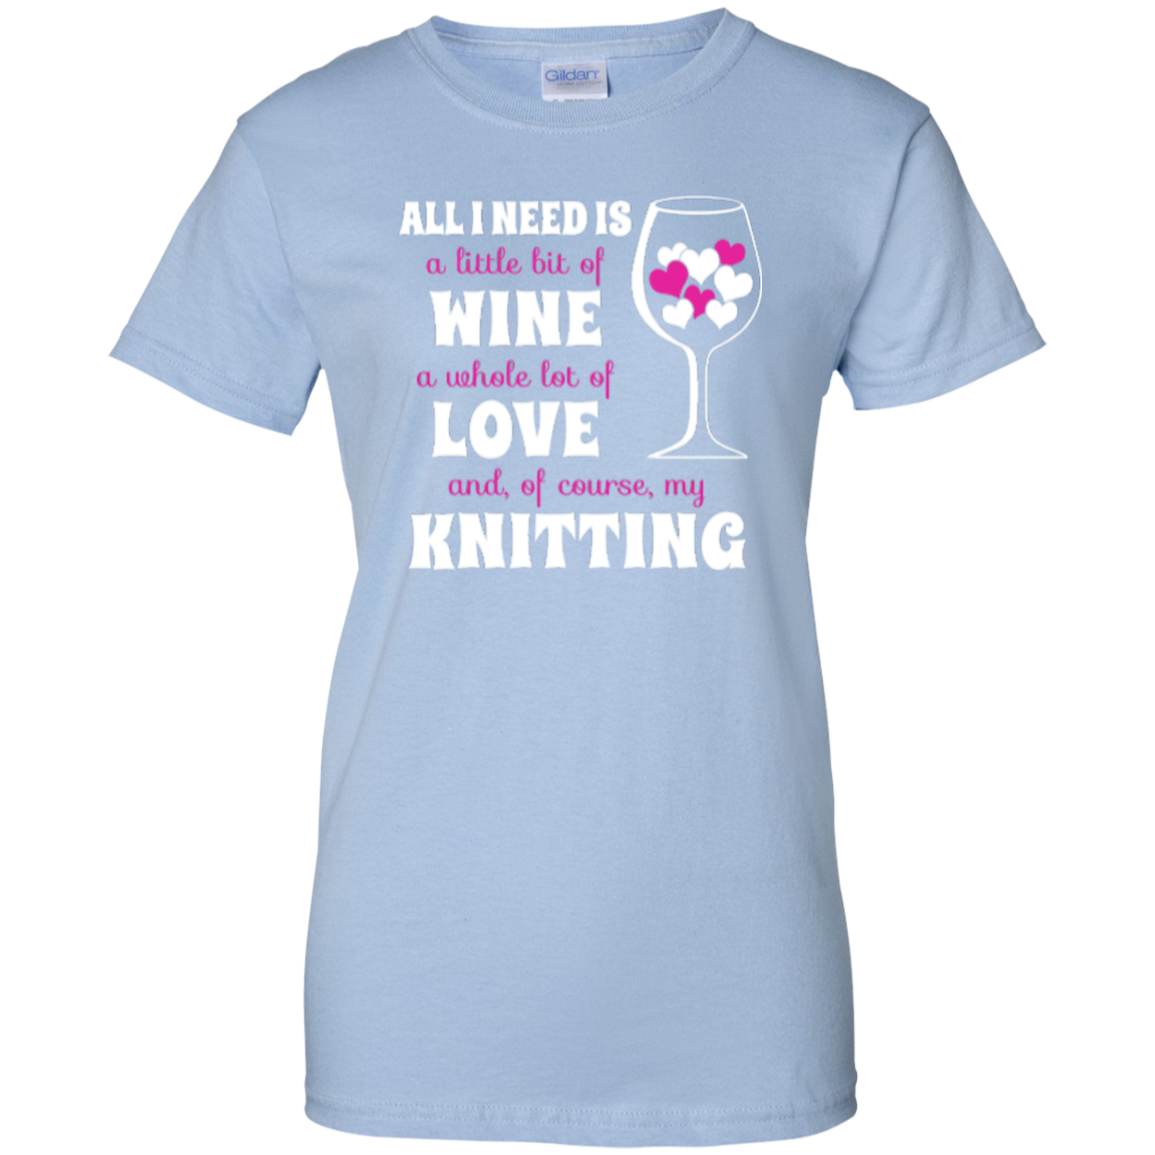 All I Need is Wine-Love-Knitting Ladies Custom 100% Cotton T-Shirt - Crafter4Life - 7